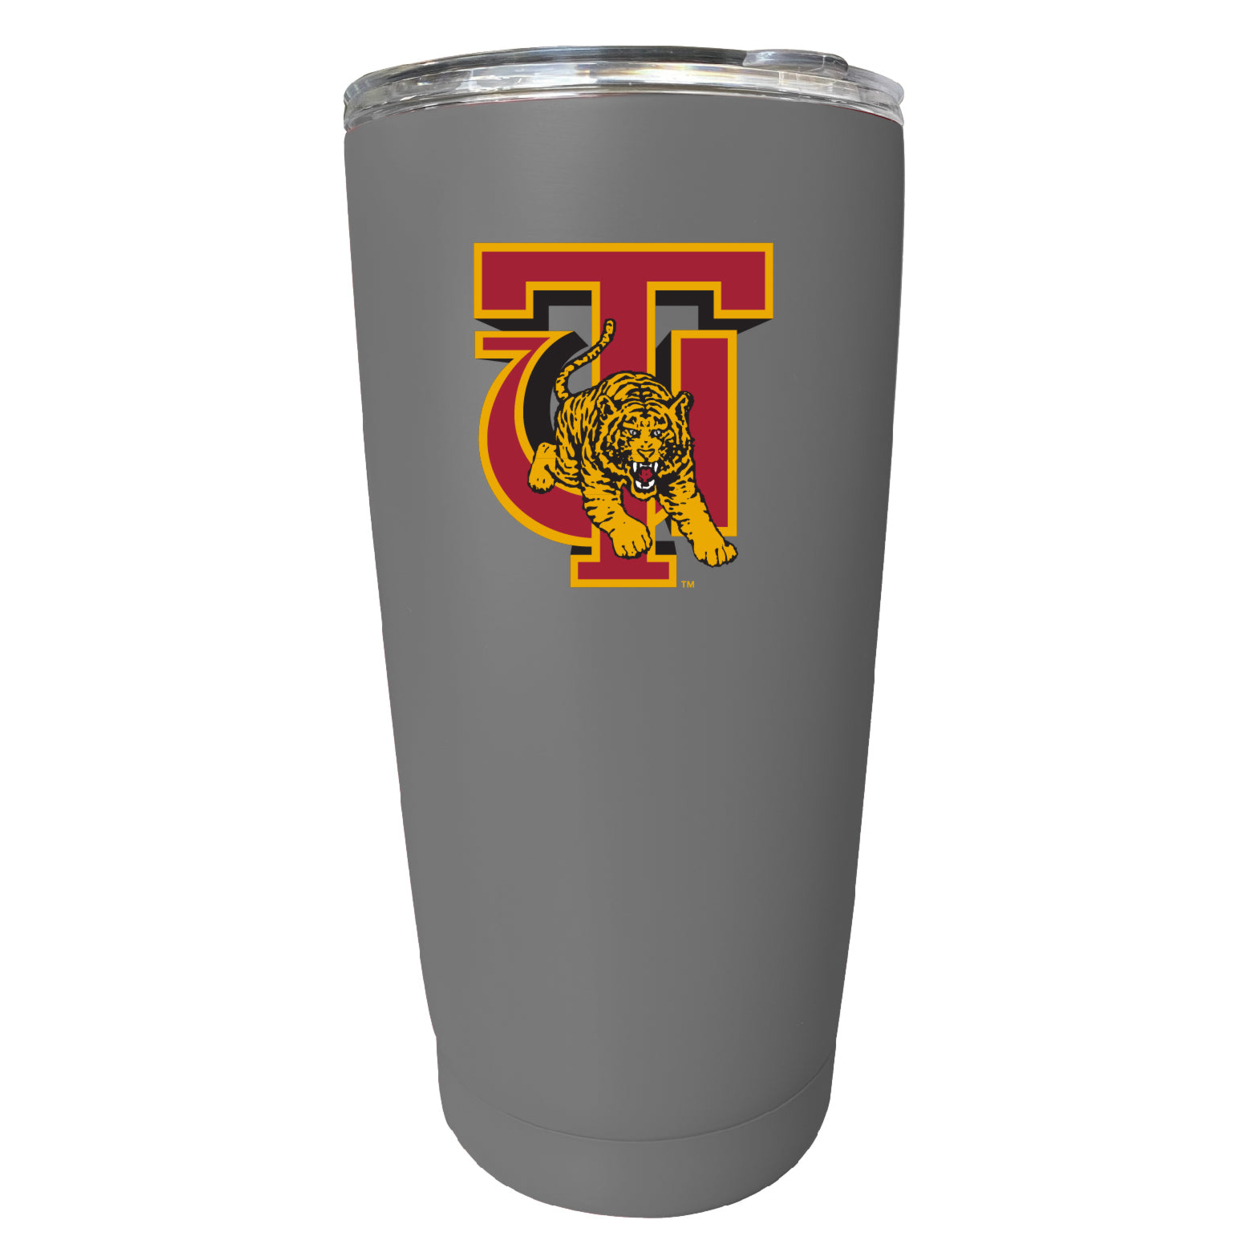 Tuskegee University 16 Oz Stainless Steel Insulated Tumbler - Gray